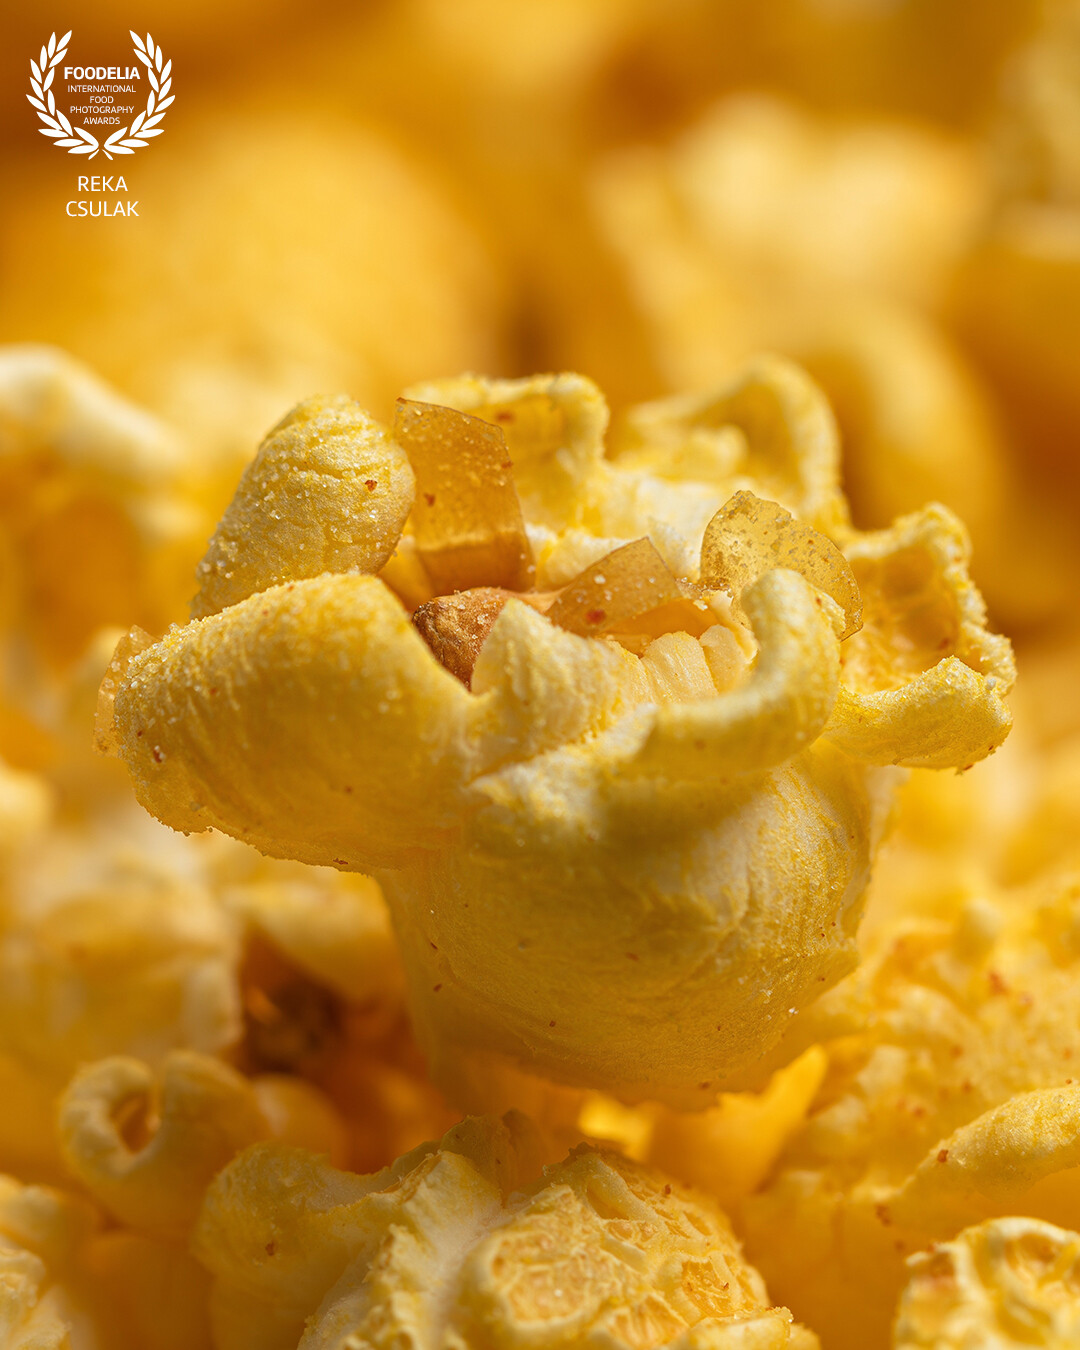 You probably never realised, how versatile shapes and shades are included in your popcorn bag, so it's now my pleasure to highlight the beauty of a single piece of popcorn in this macro photo.